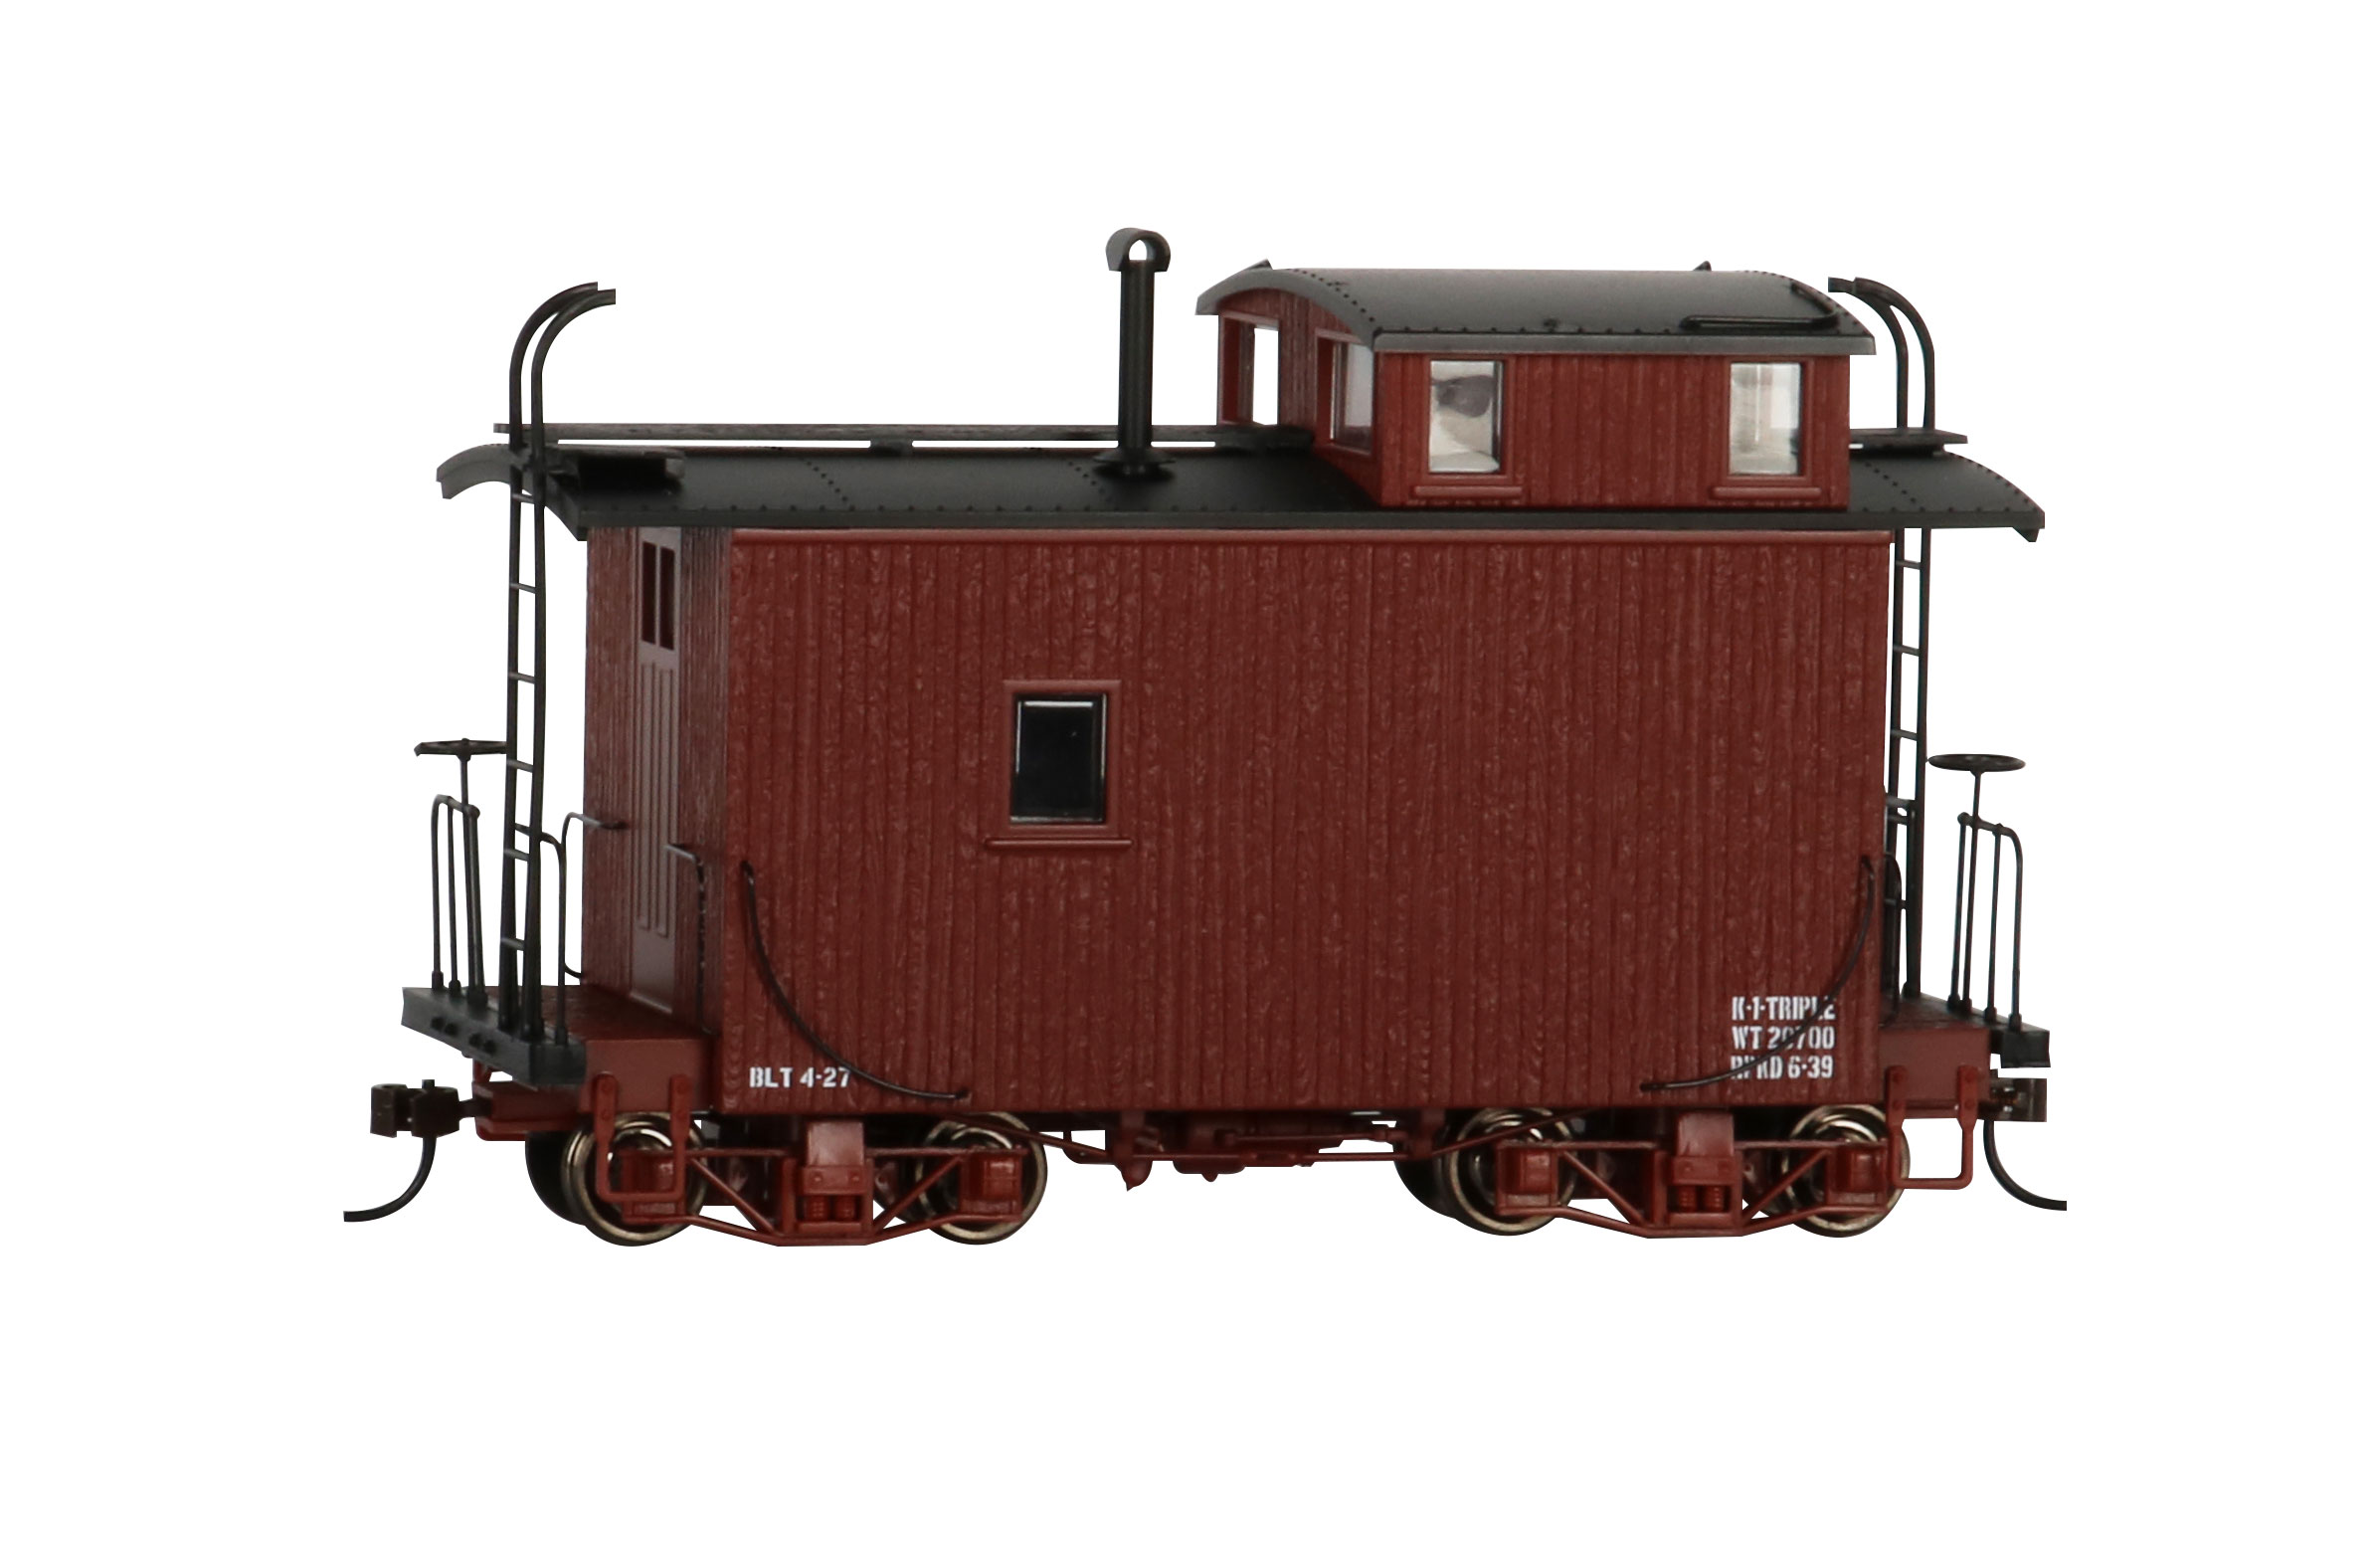 18 ft. Off-Set Cupola Caboose - Oxide Red, Data Only